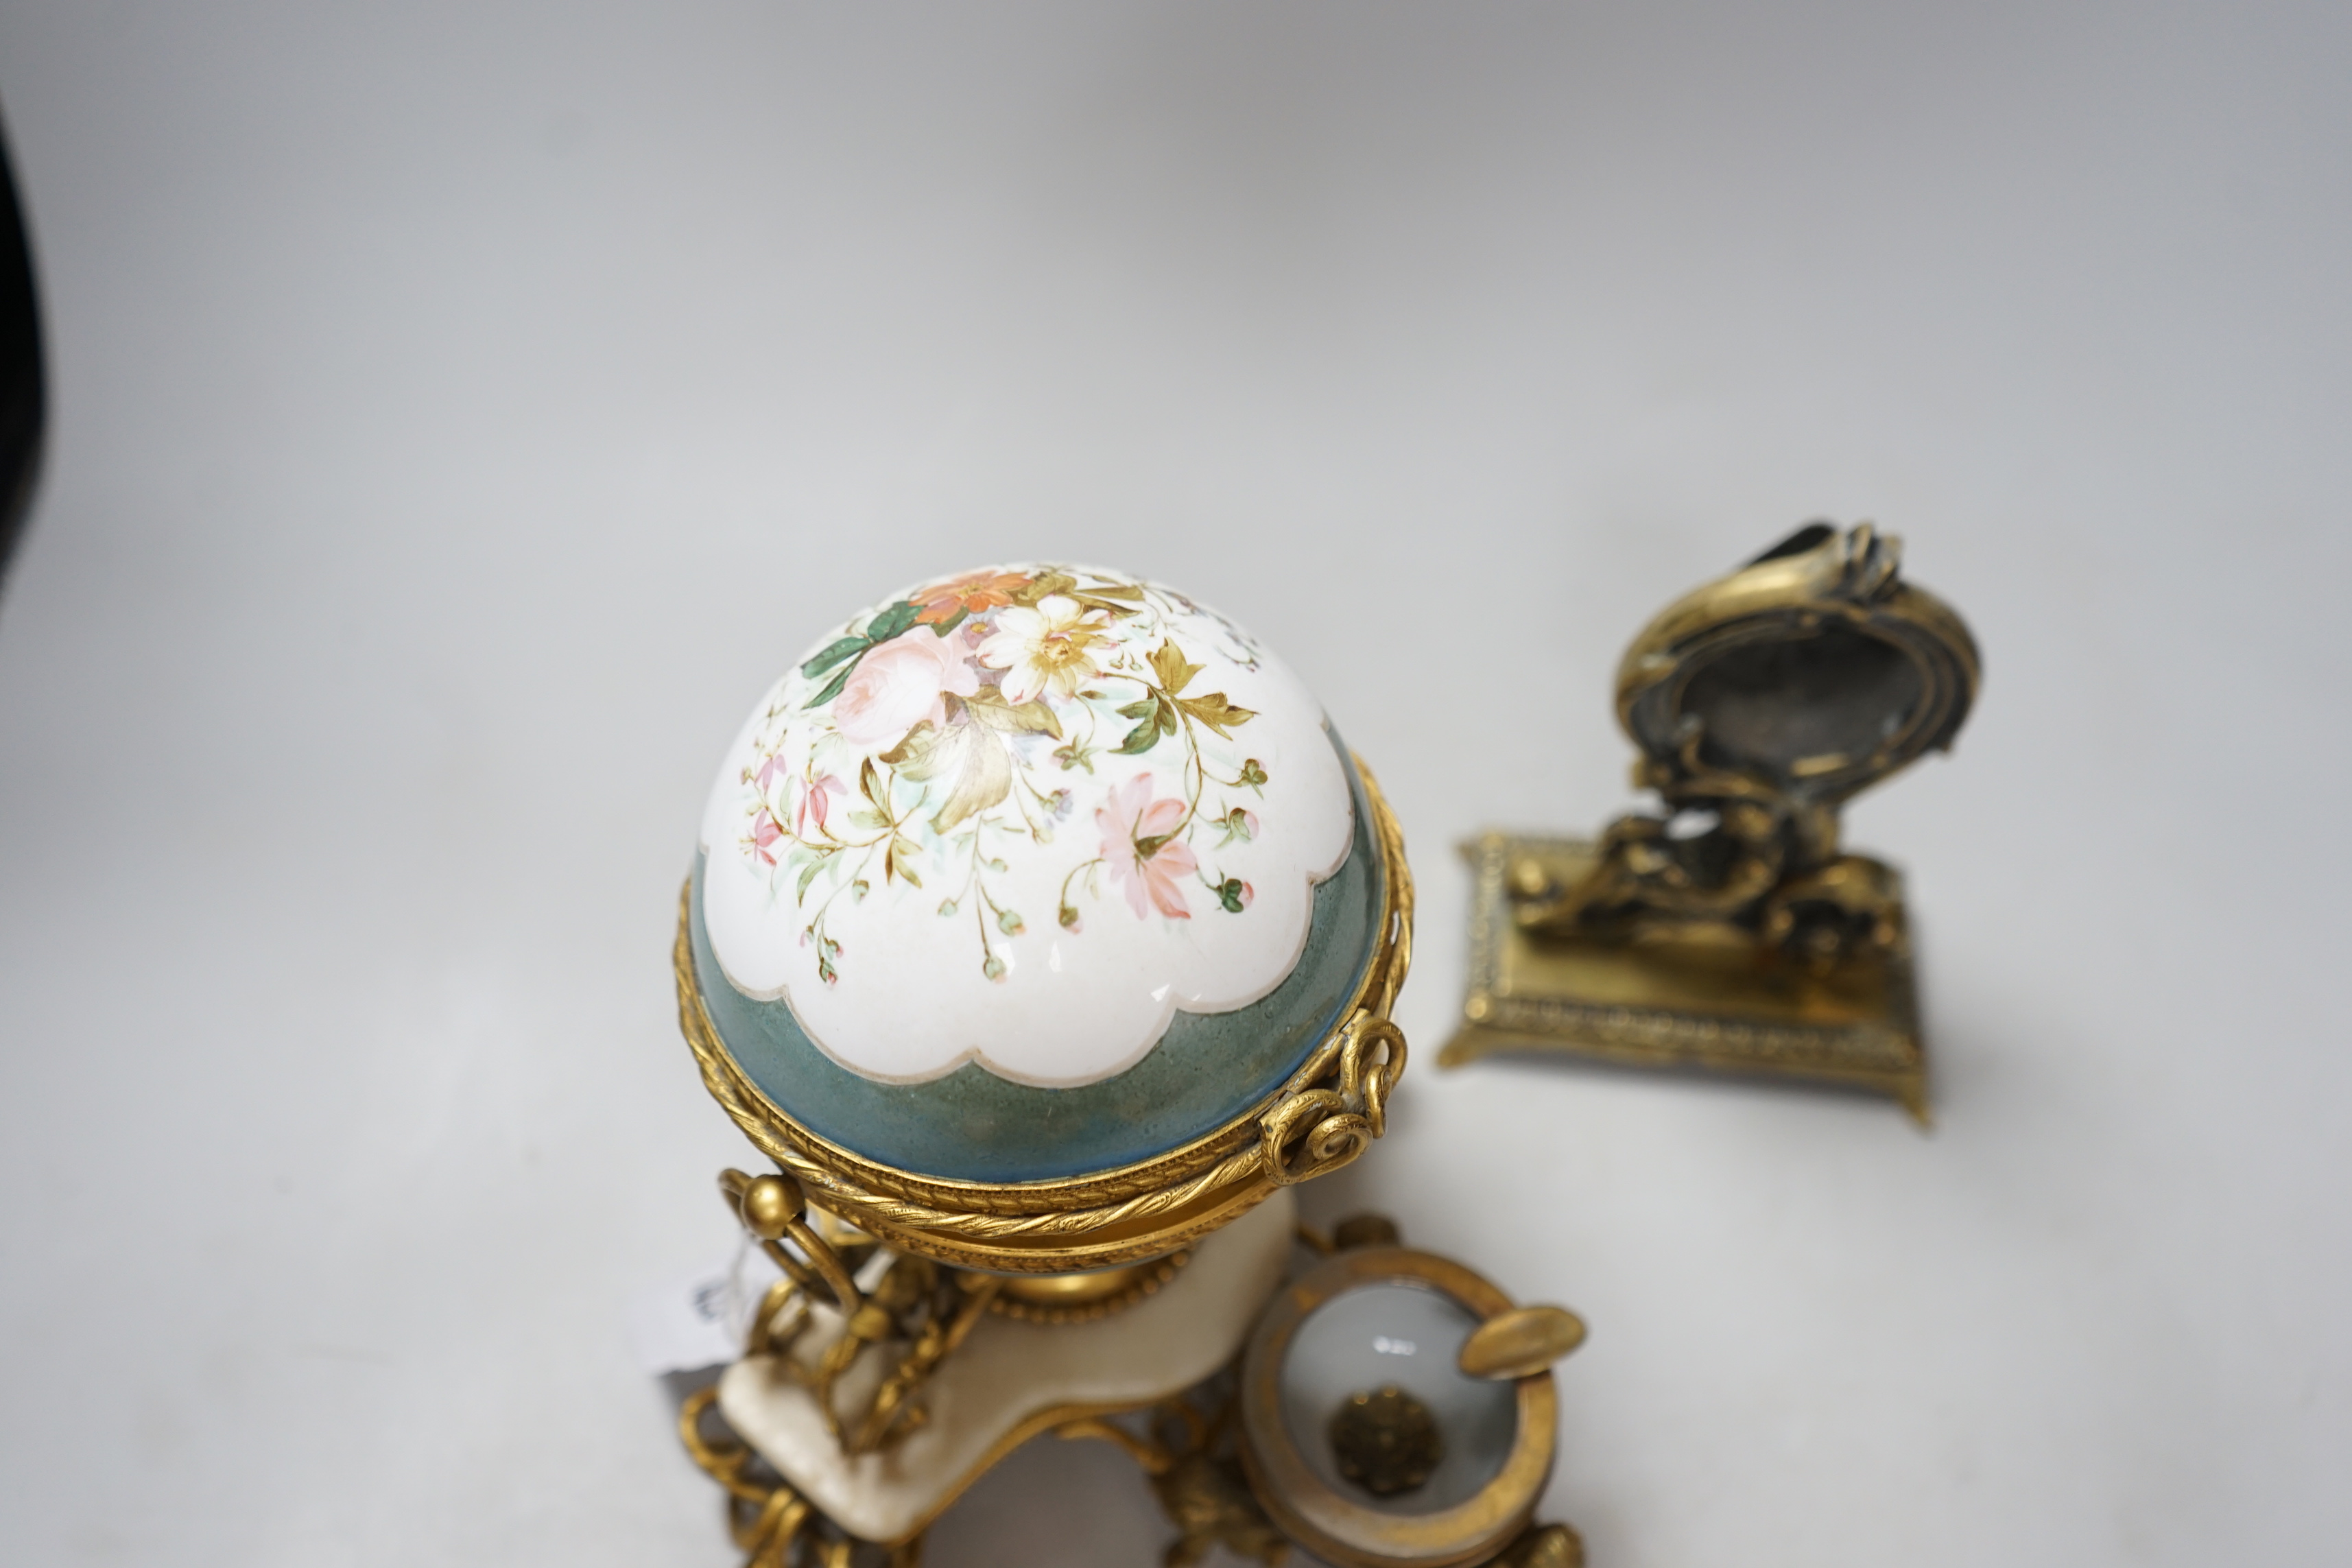 A 19th century French globular scent bottle casket together with a similar ash tray and a watch - Image 5 of 5